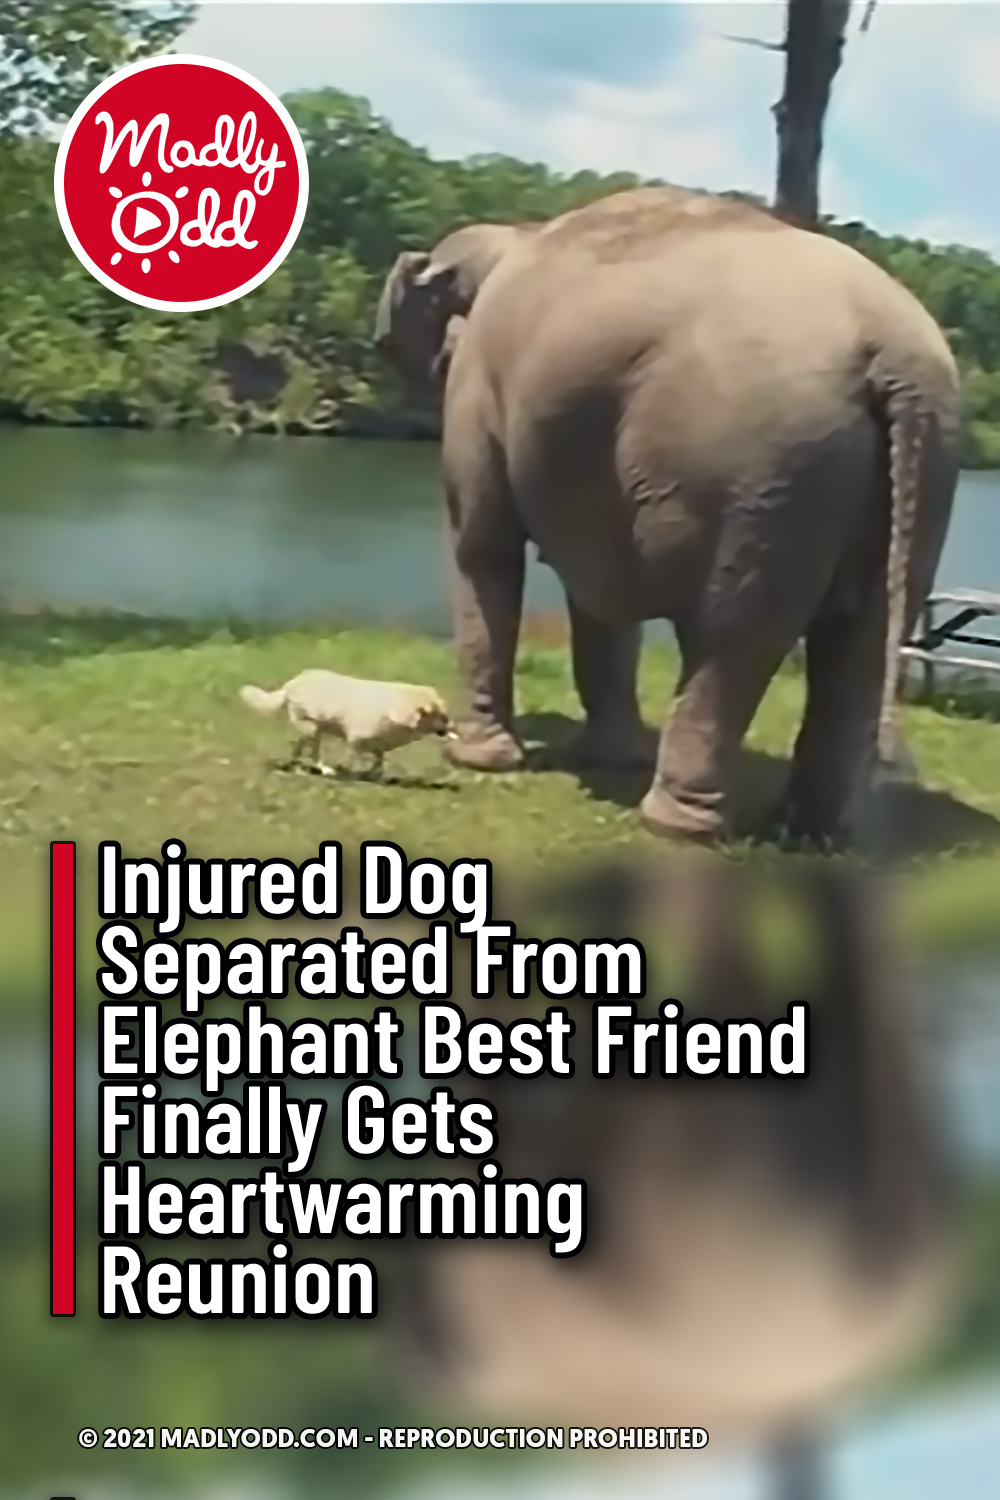 Injured Dog Separated From Elephant Best Friend Finally Gets Heartwarming Reunion